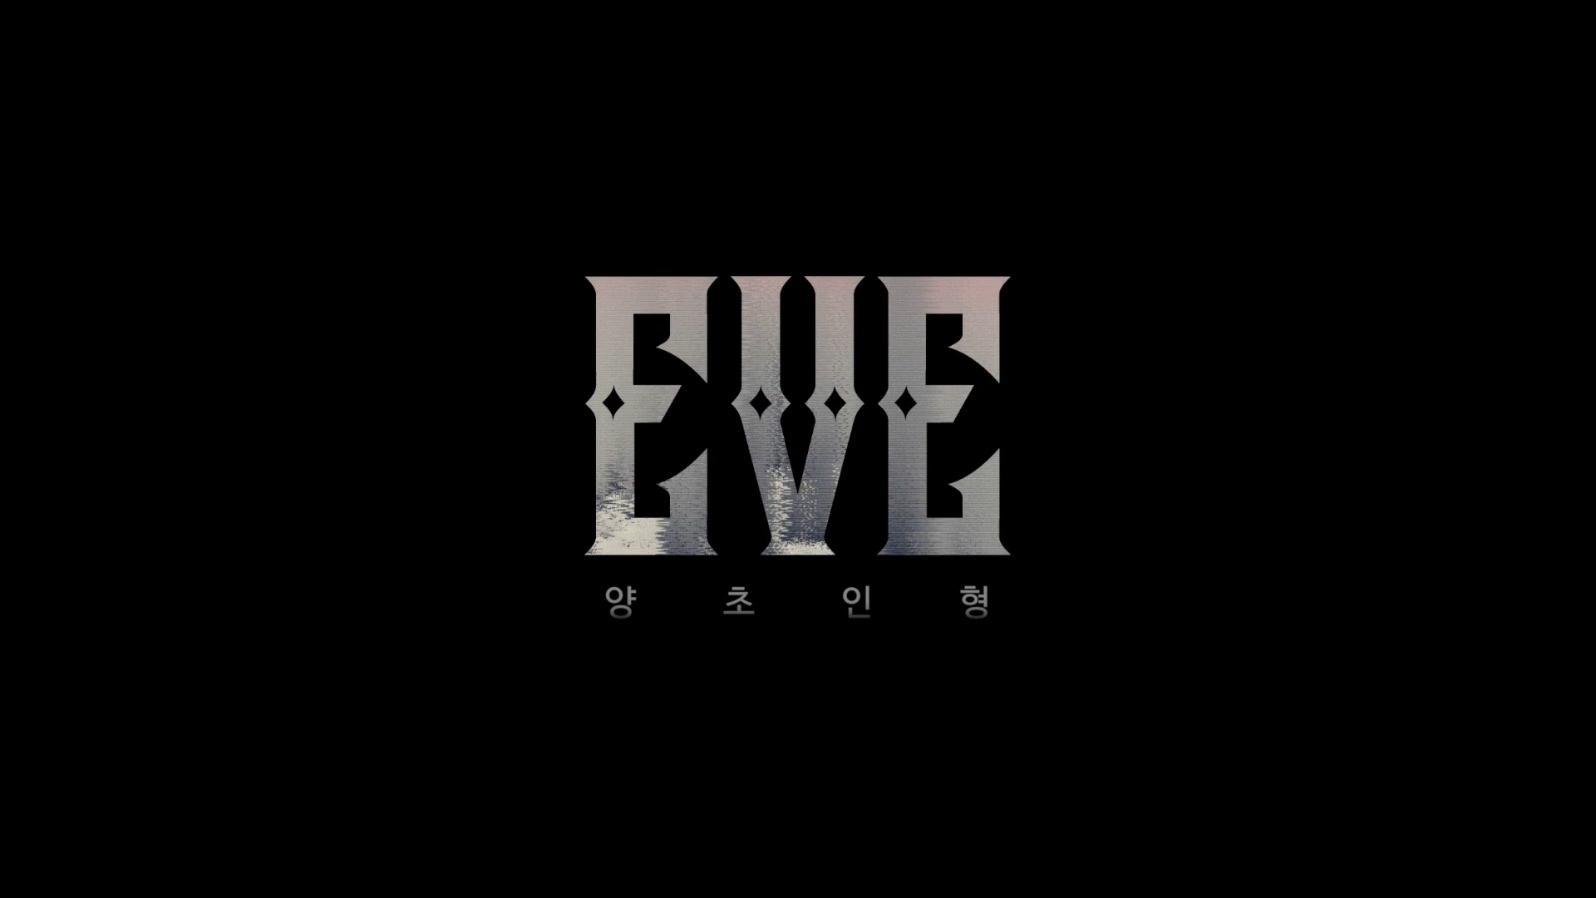 EVE - Candle - 1080P